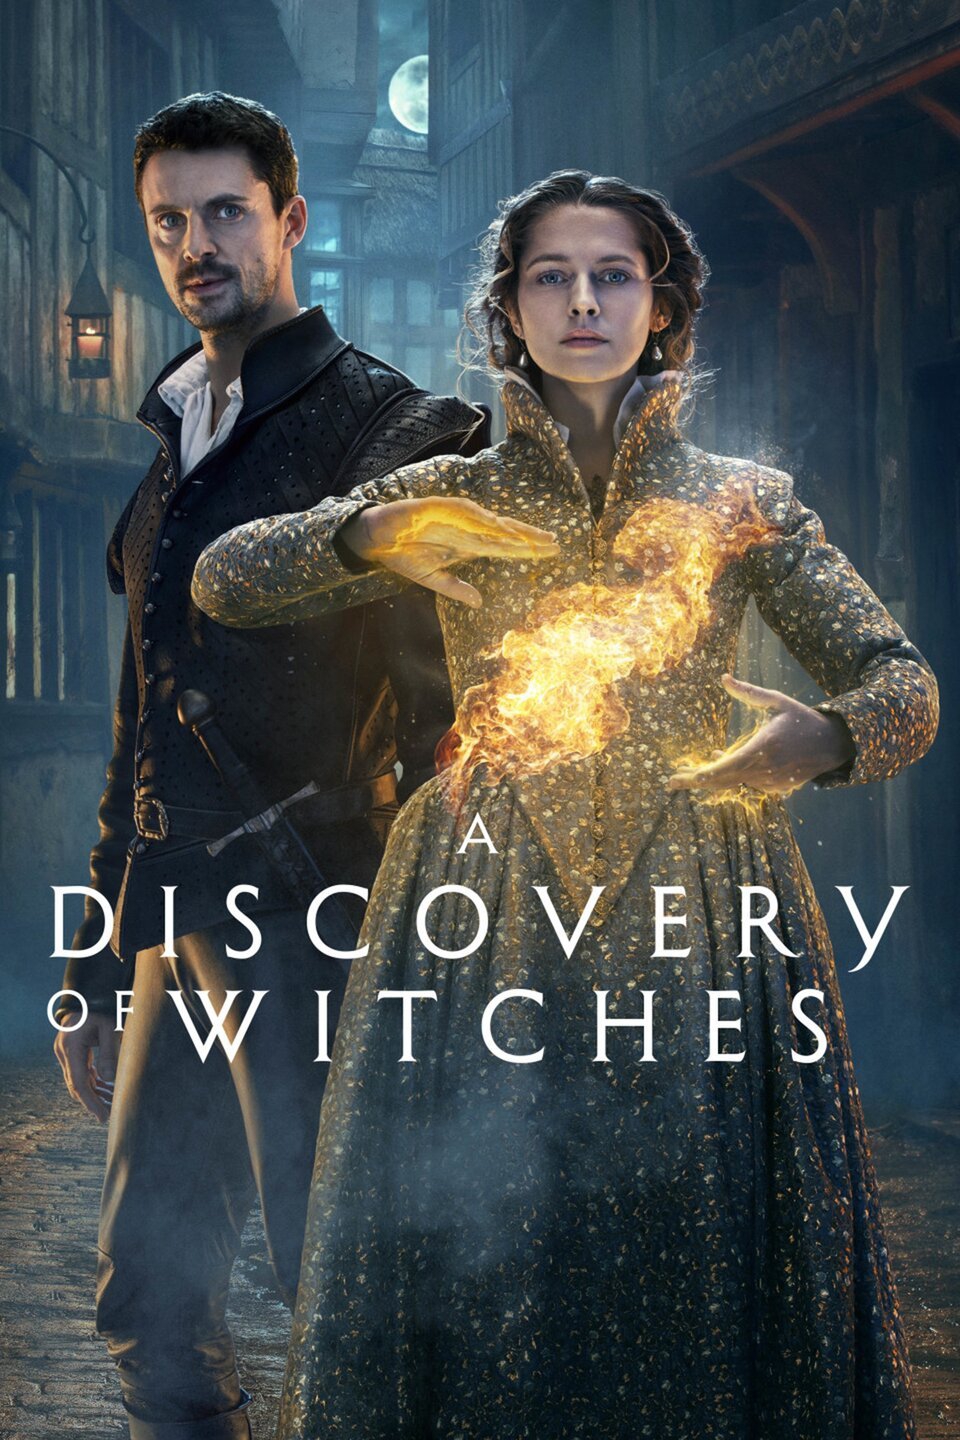 Watch A Discovery of Witches (2018) Online | Free Trial | The Roku